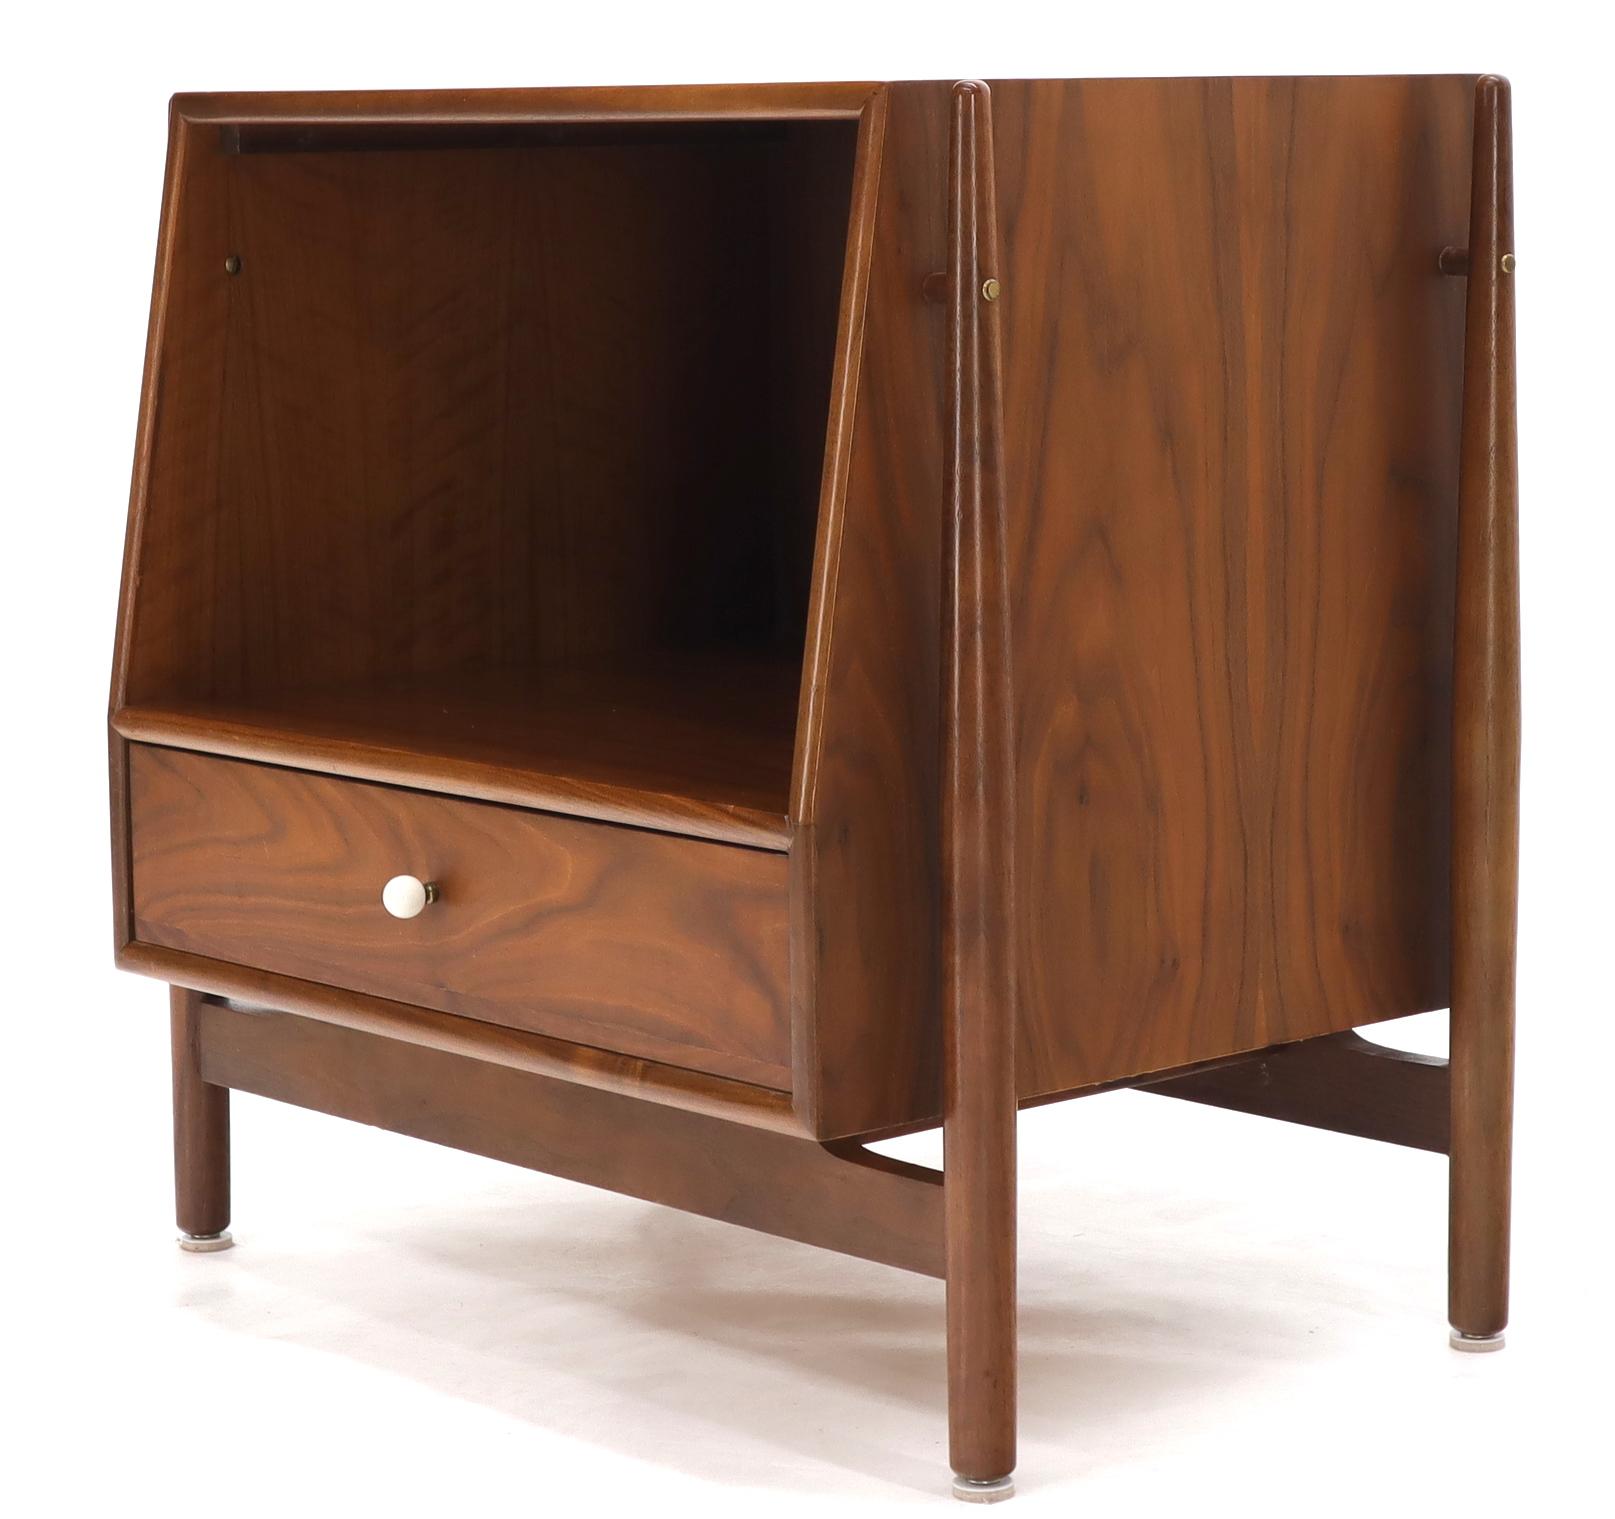 Pair of Walnut Mid-Century Modern End Tables Night Stands by Drexel 1